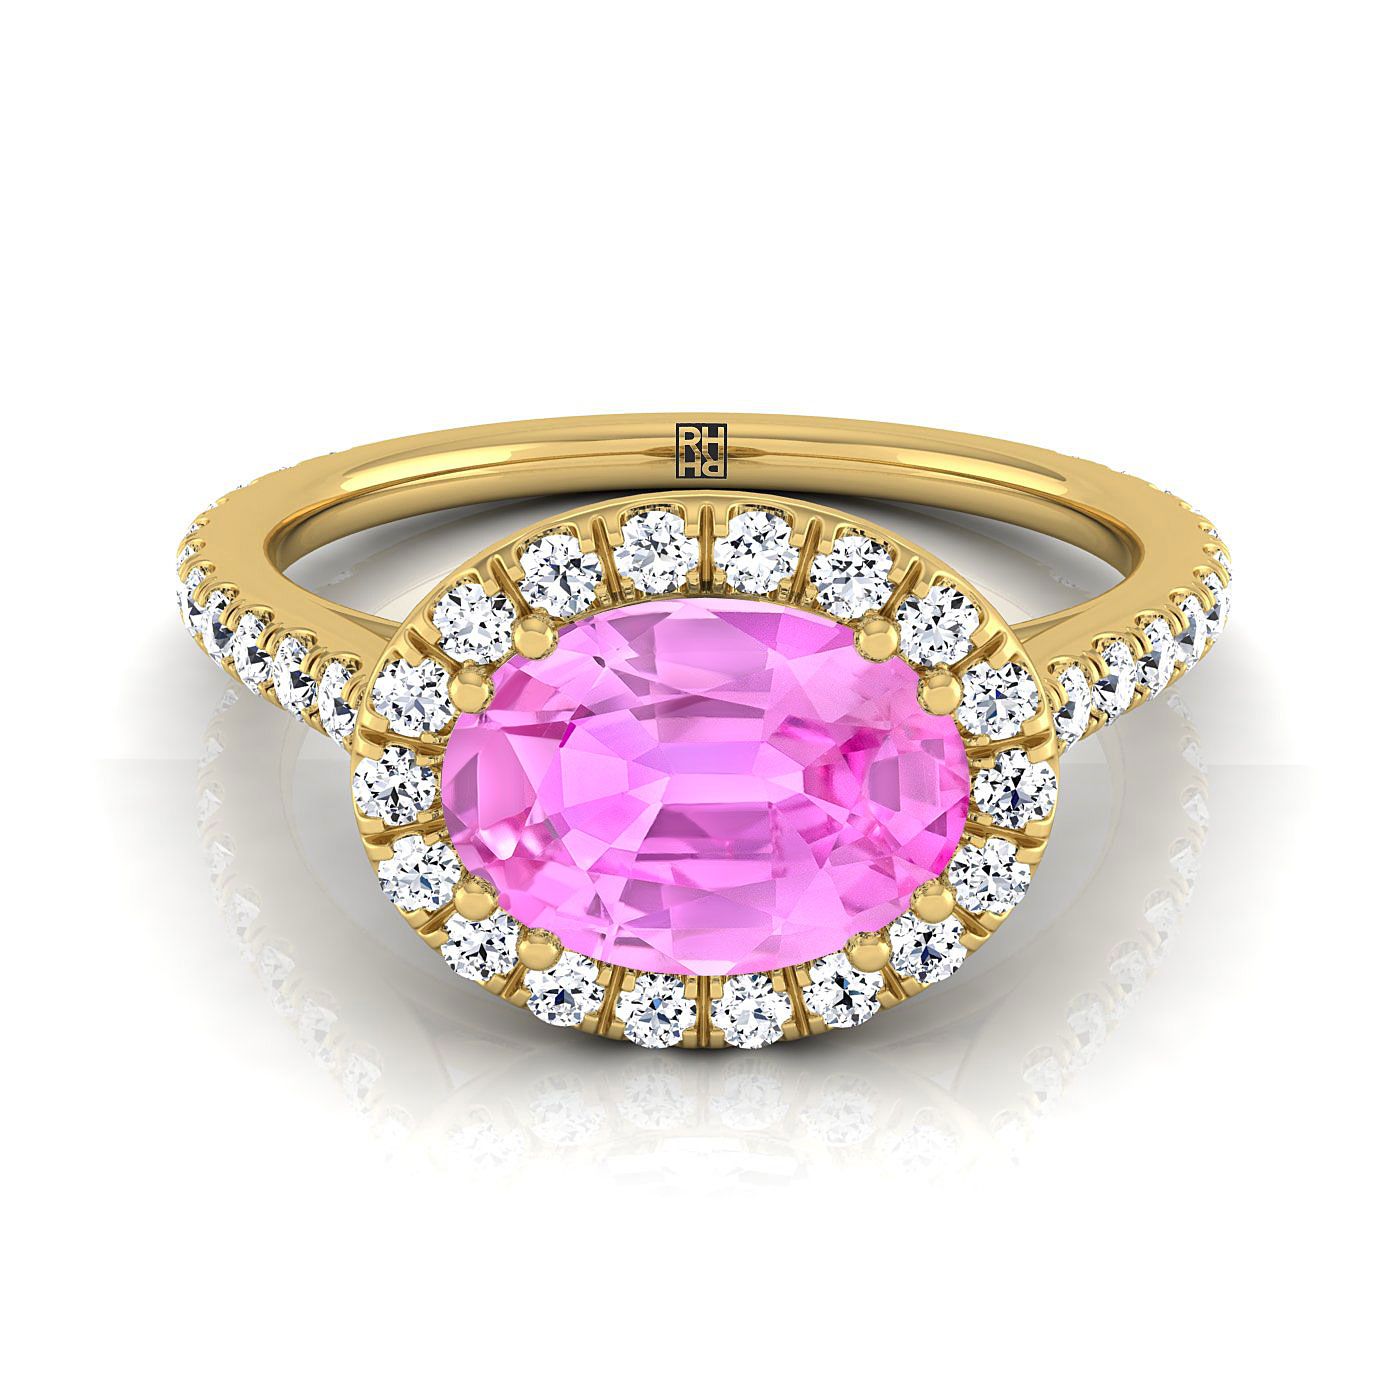 14K Yellow Gold Oval Pink Sapphire Horizontal Fancy East West Diamond Halo Engagement Ring -1/2ctw